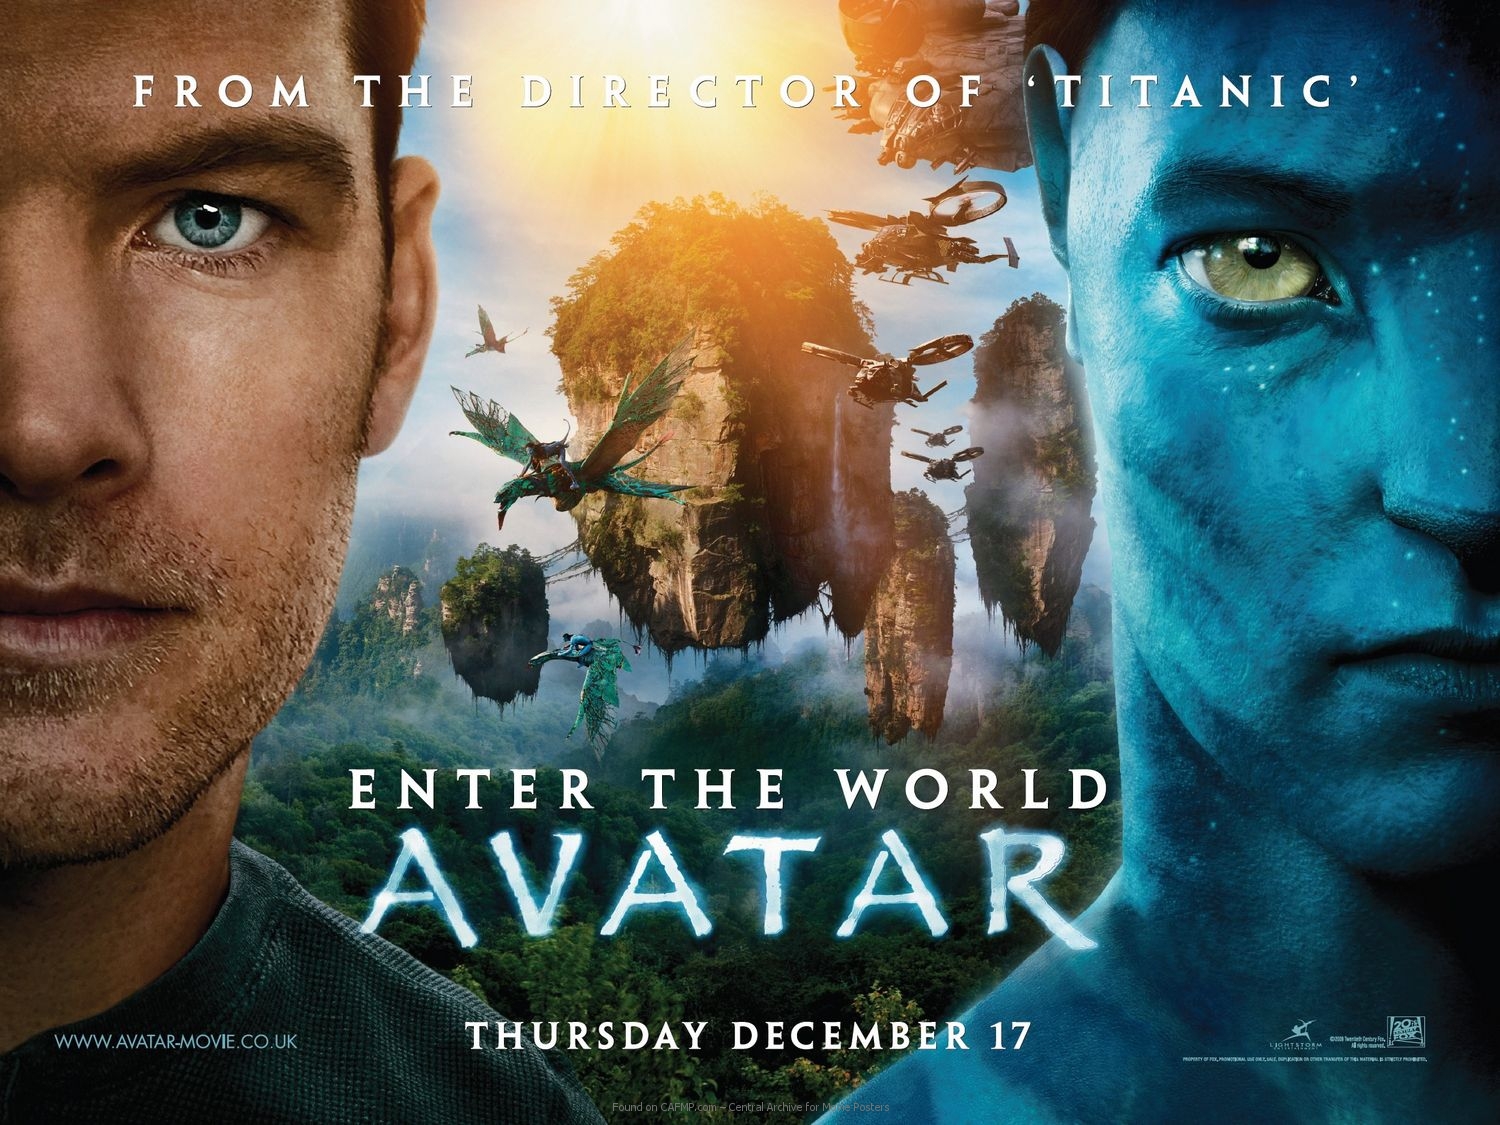 Movie Poster »Avatar Enter the World« on CAFMP